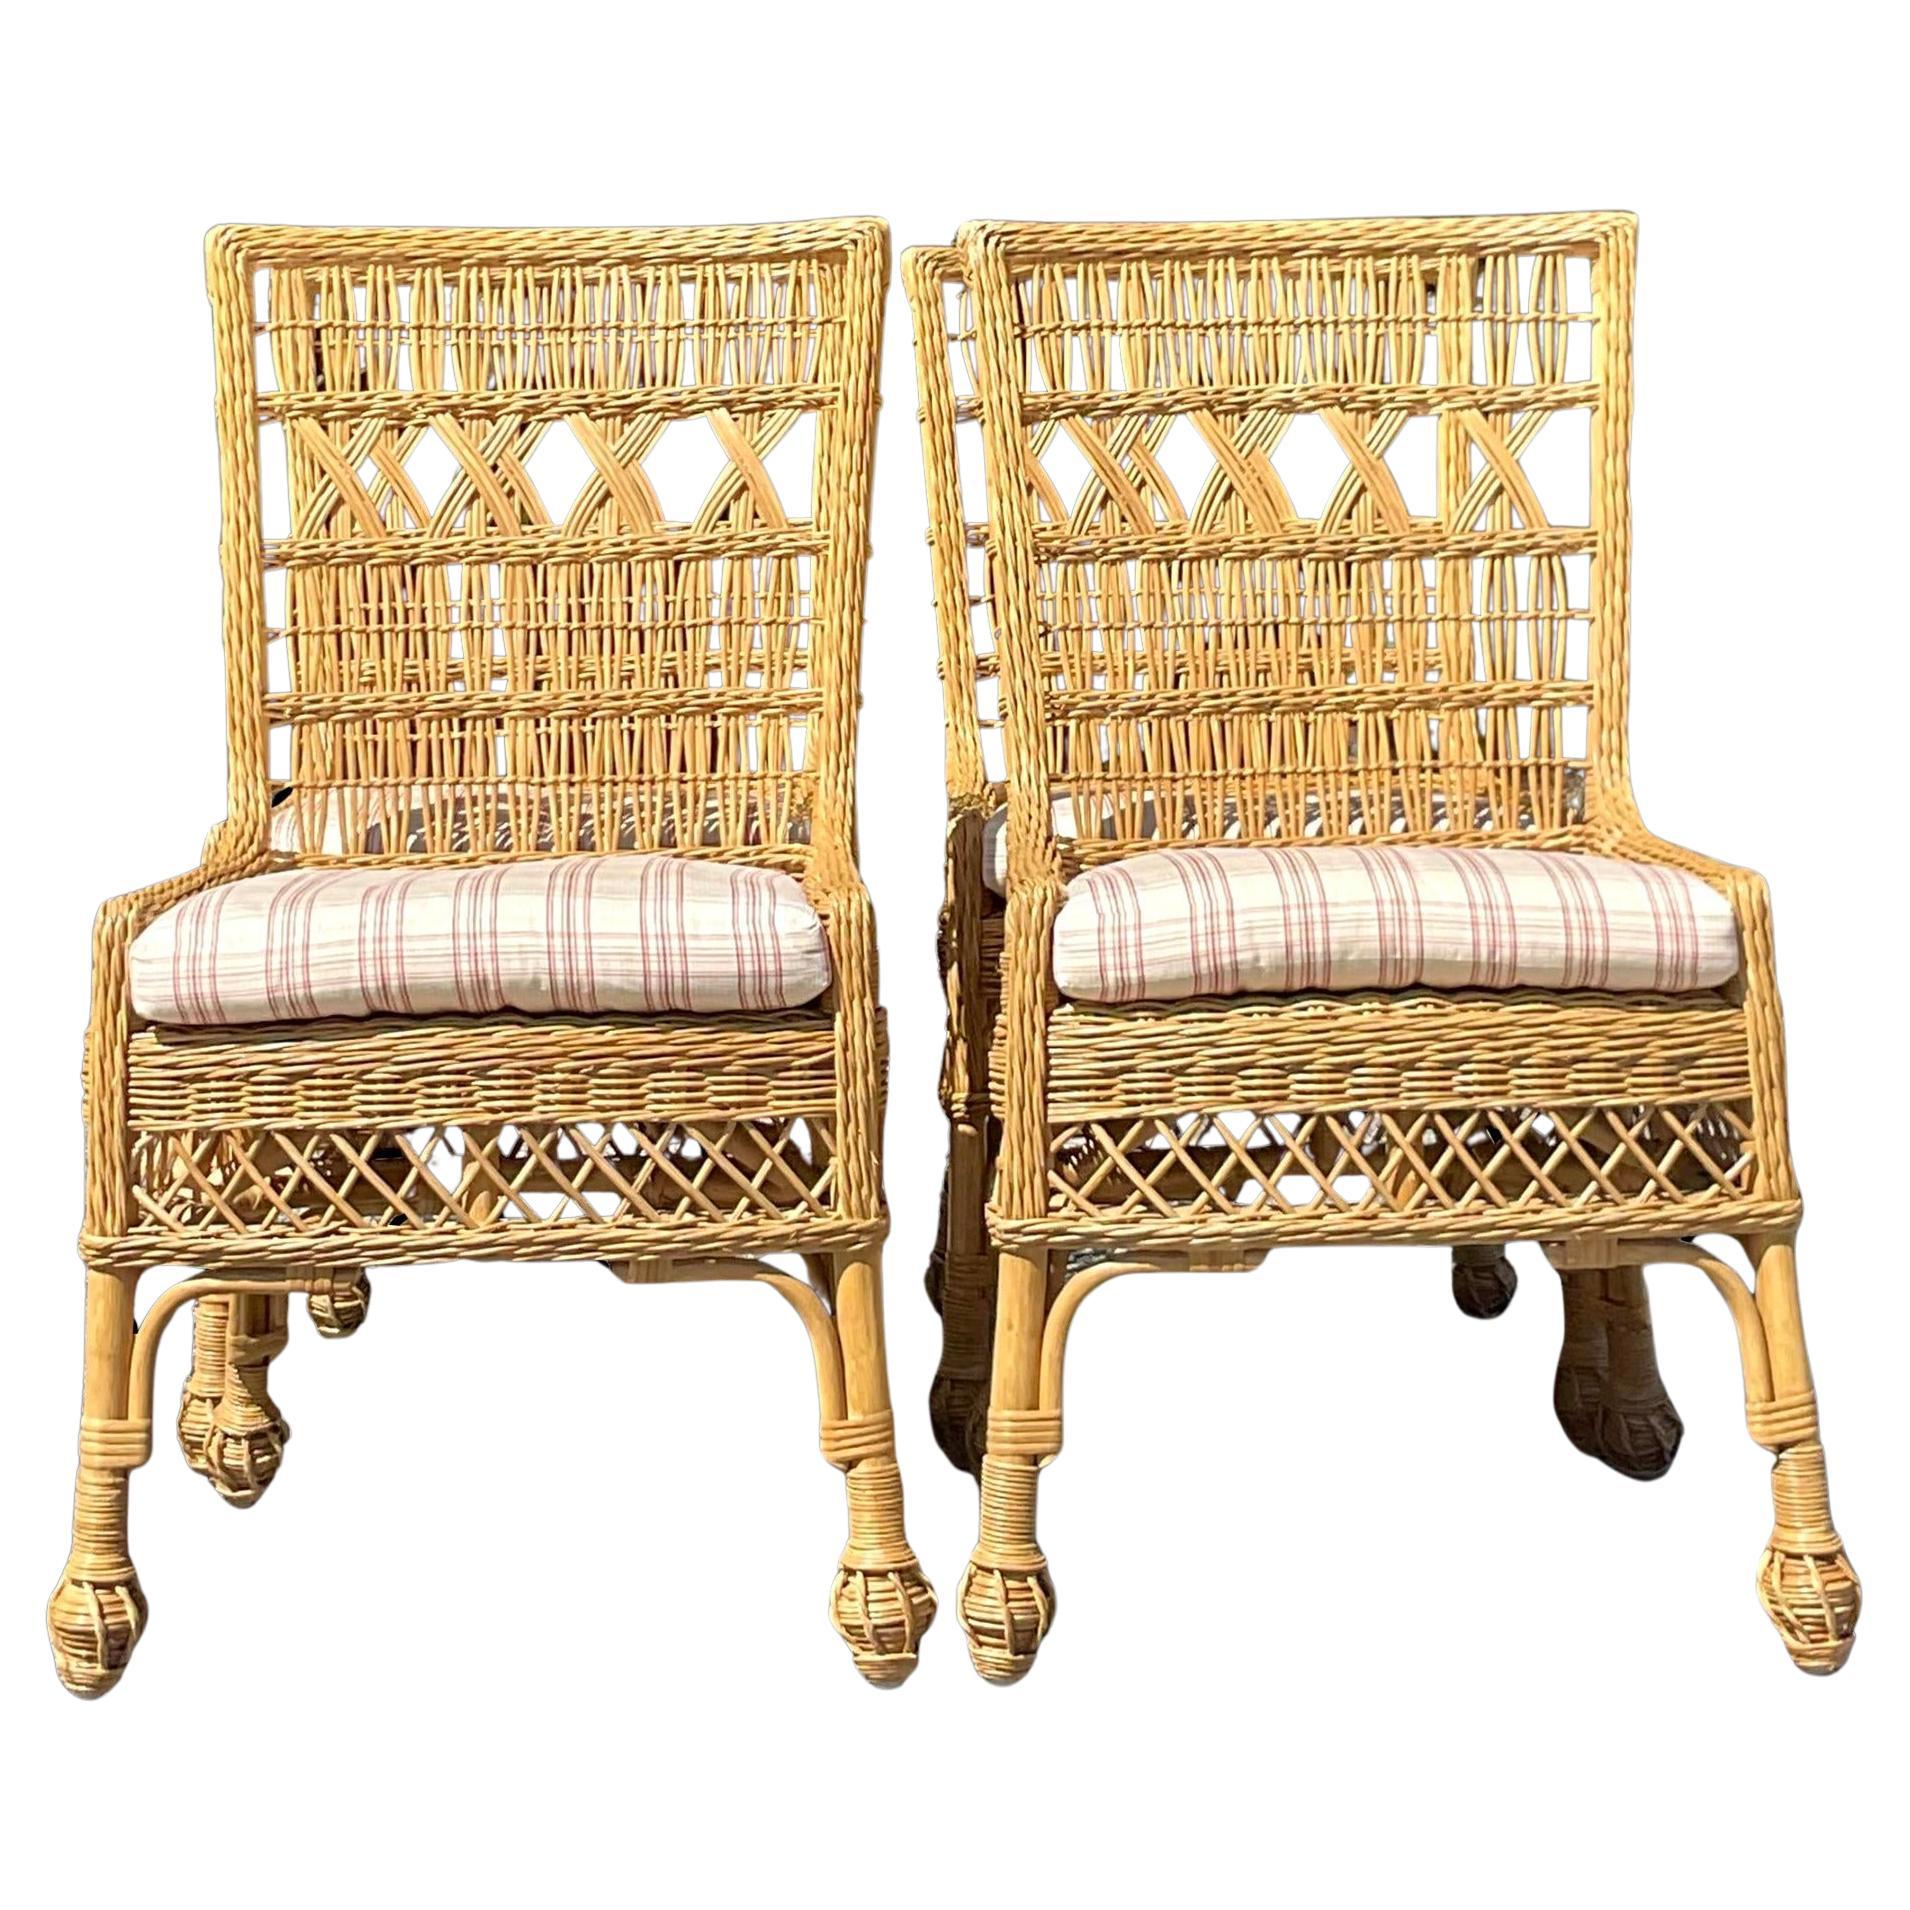 Vintage Coastal Woven Rattan Dining Chairs - Set of 4